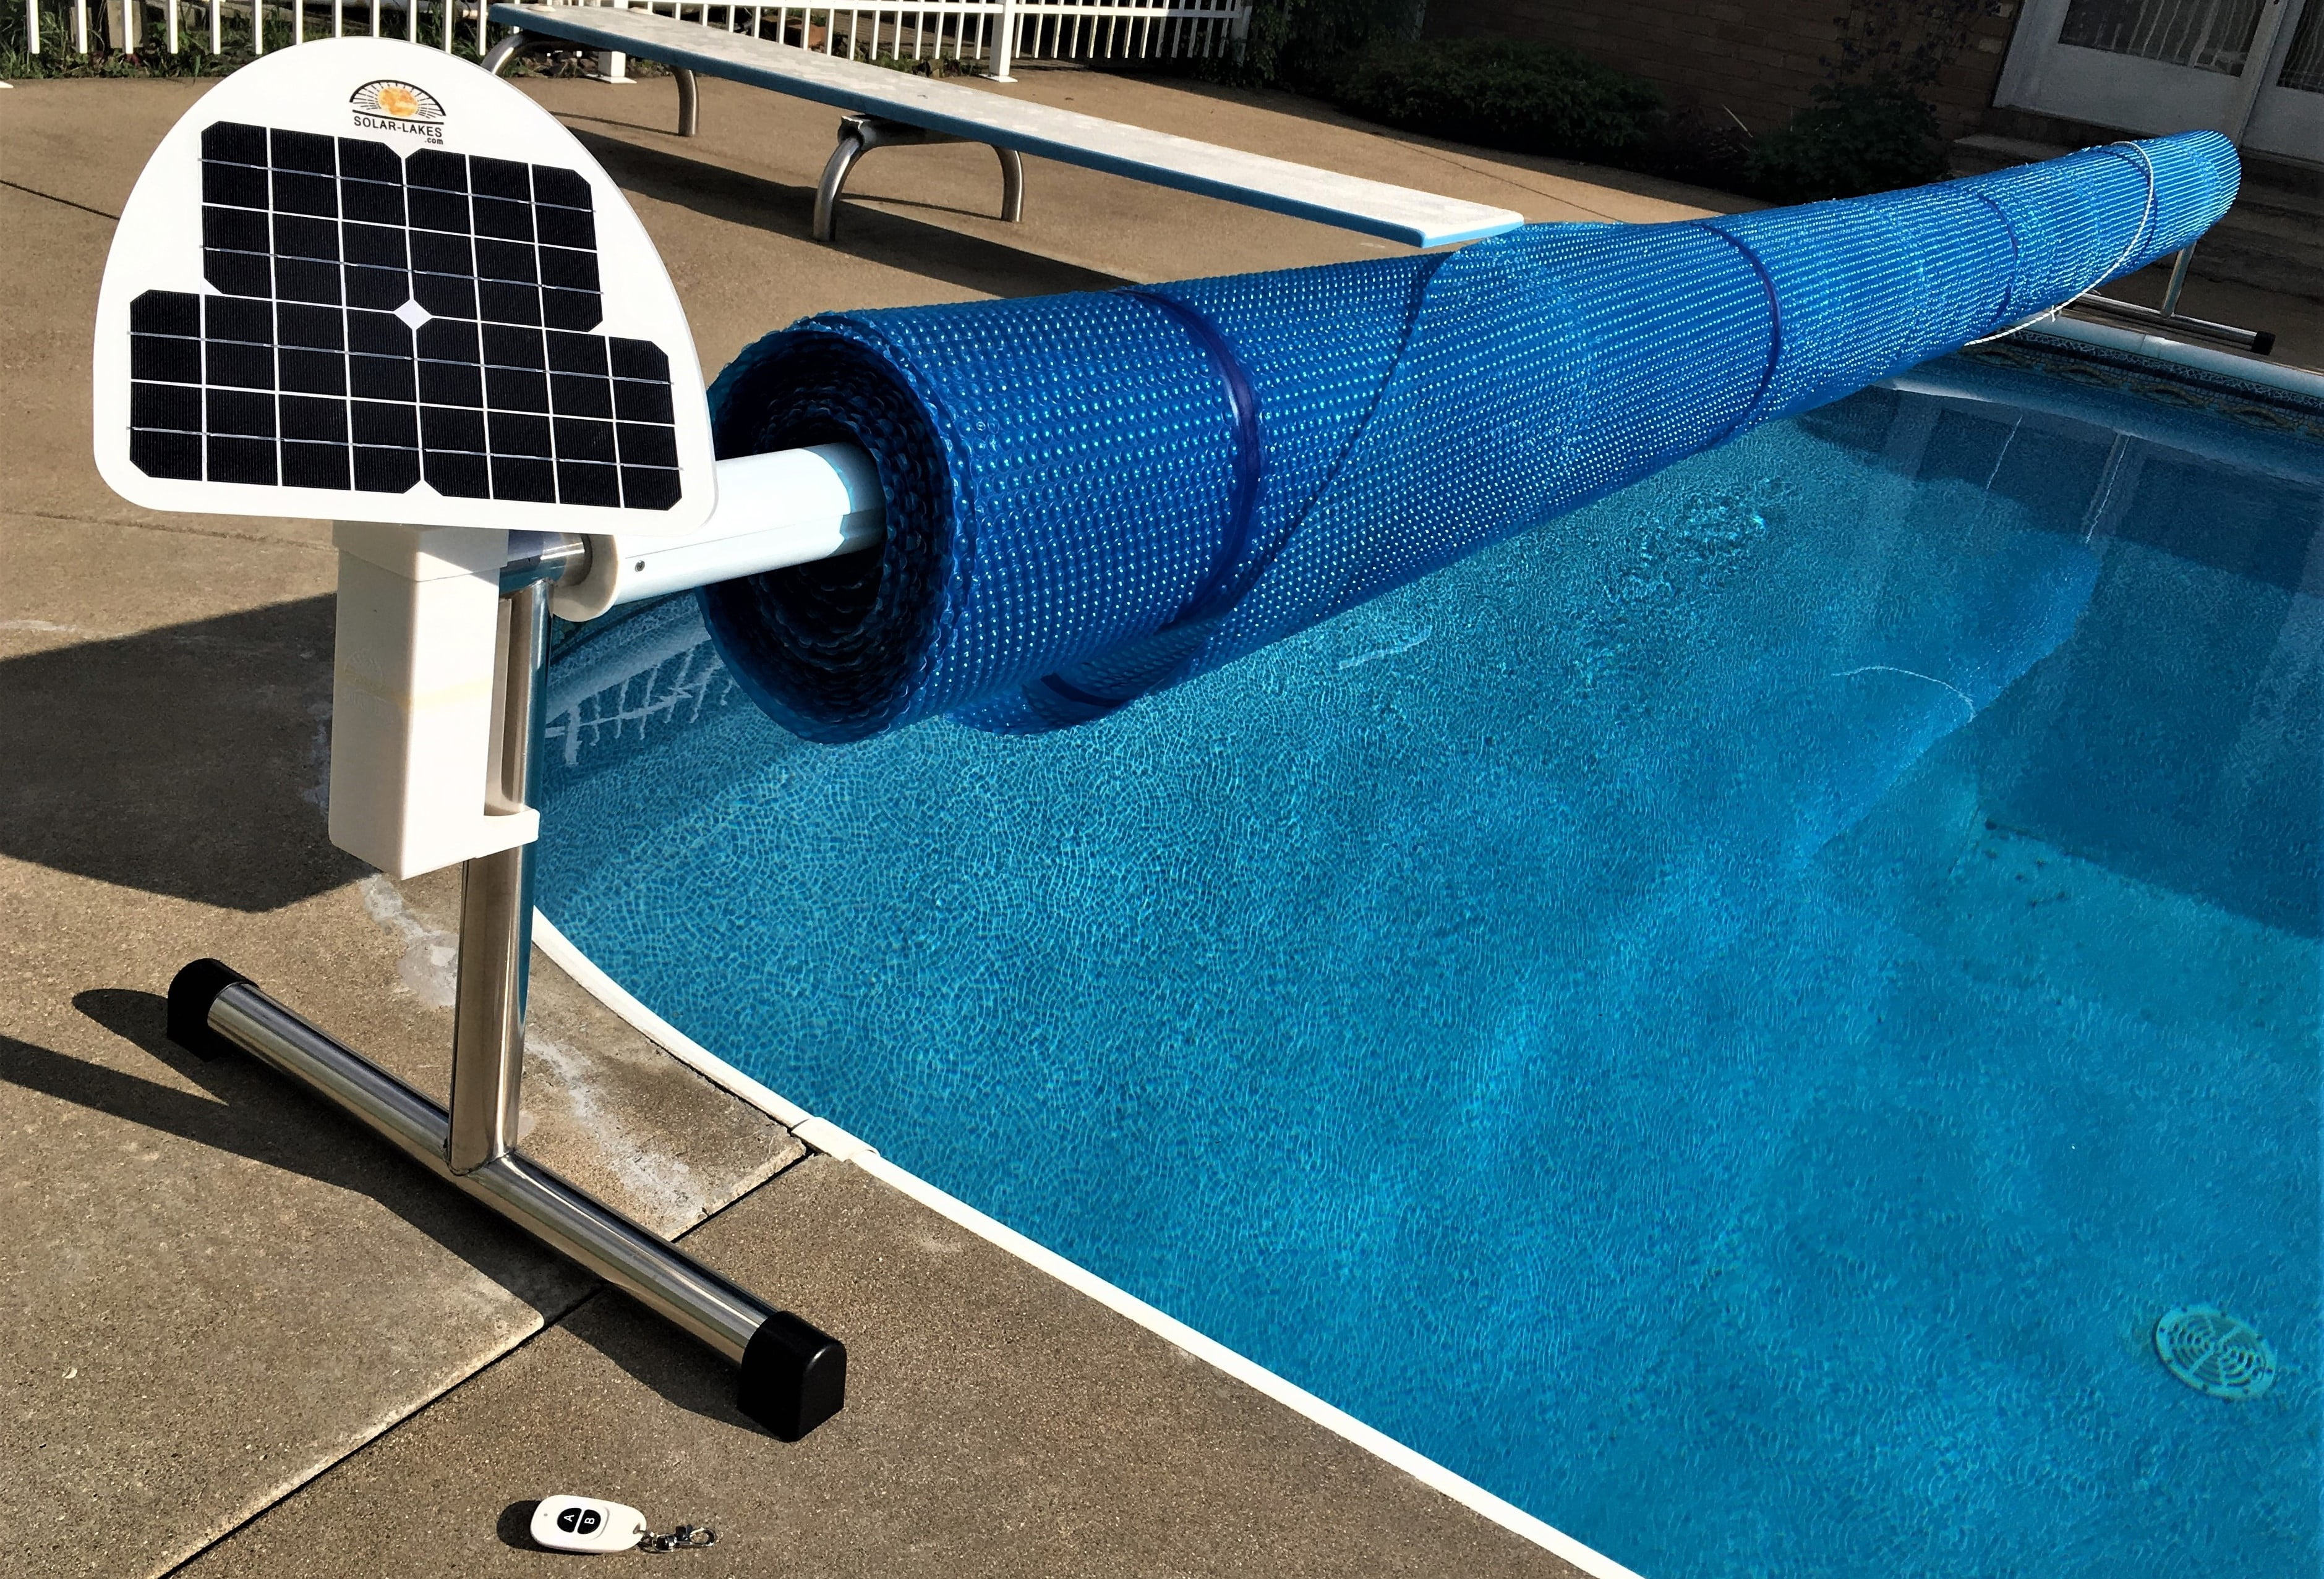  Automatic Solar Blanket Cover Reel/Roller - Remote